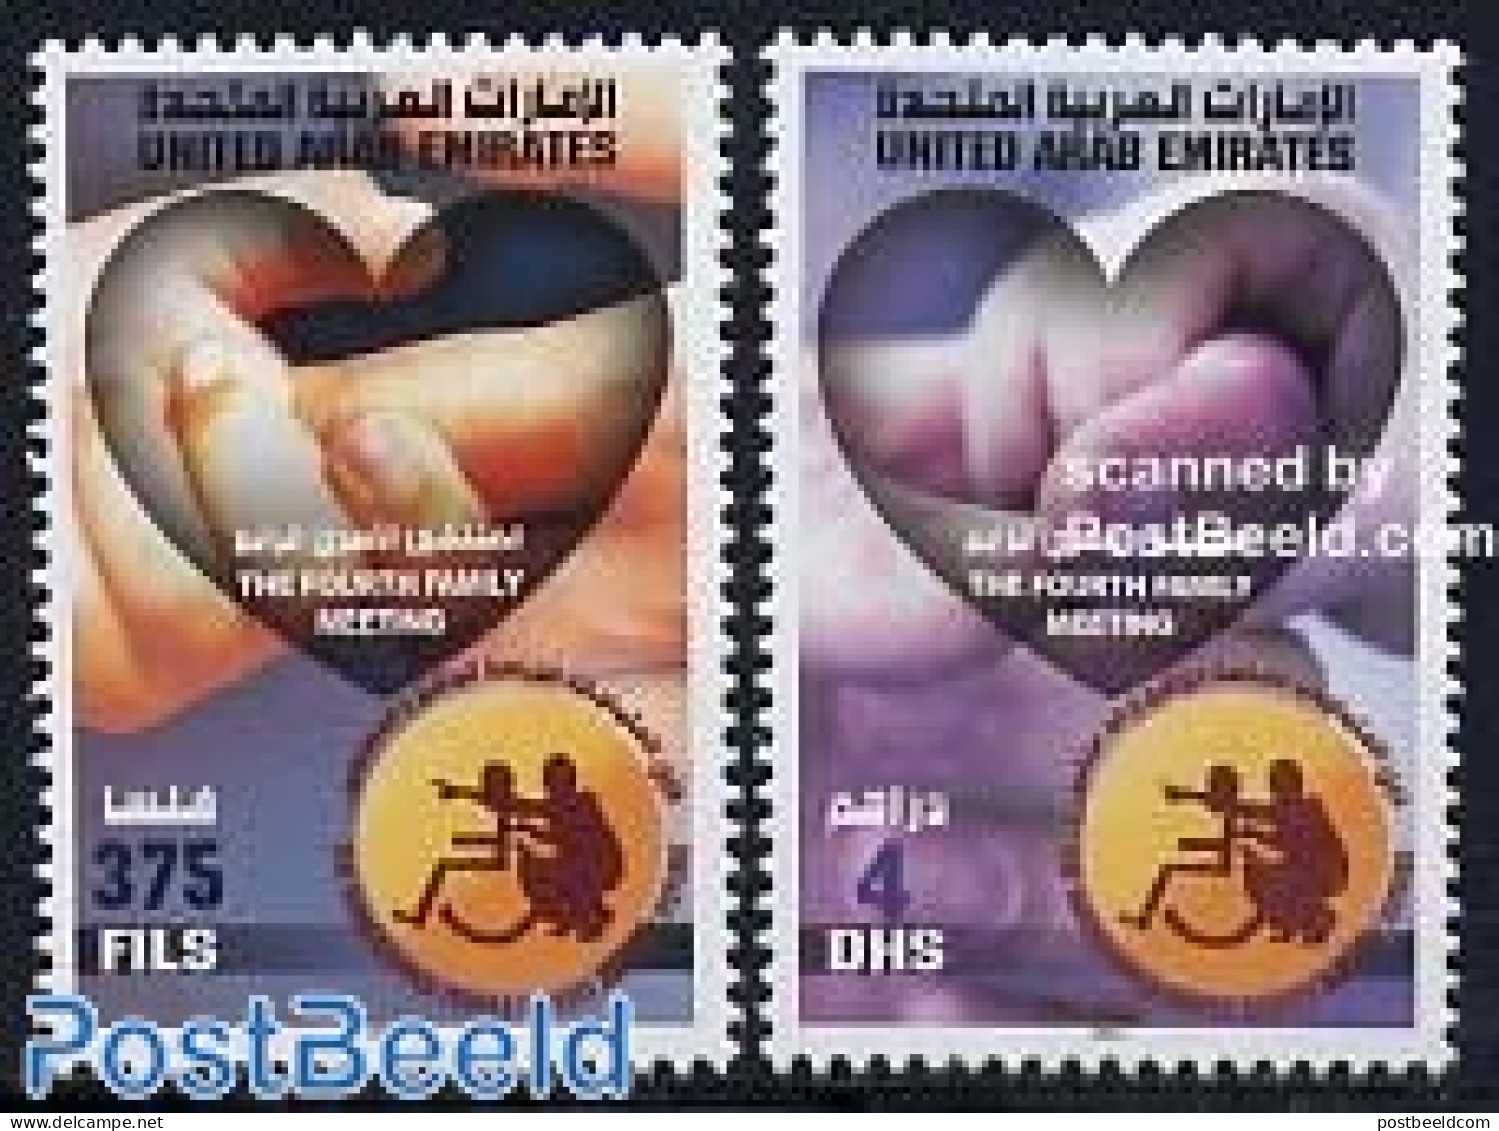 United Arab Emirates 2004 Family Meeting 2v, Mint NH, Health - Disabled Persons - Behinderungen